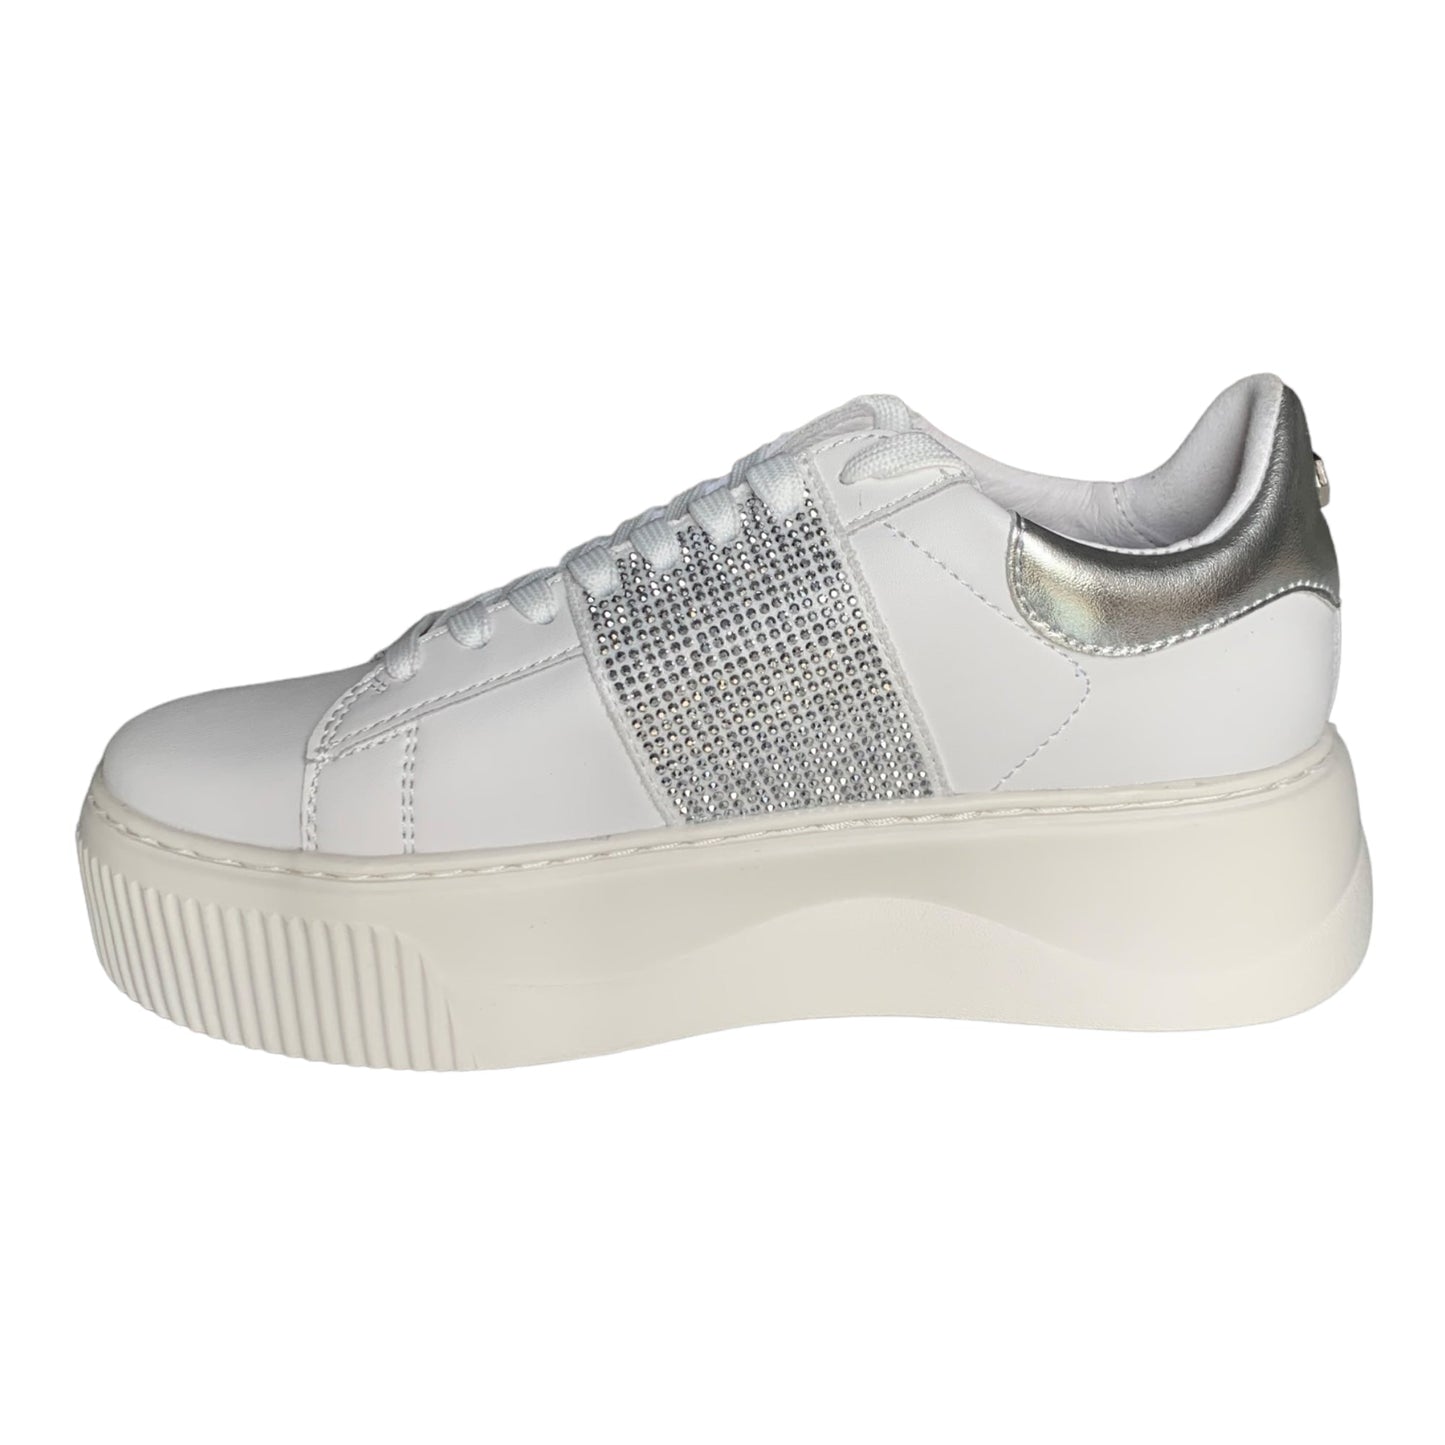 Scarpe donna Cult - Sneakers Perry Cwit 3162